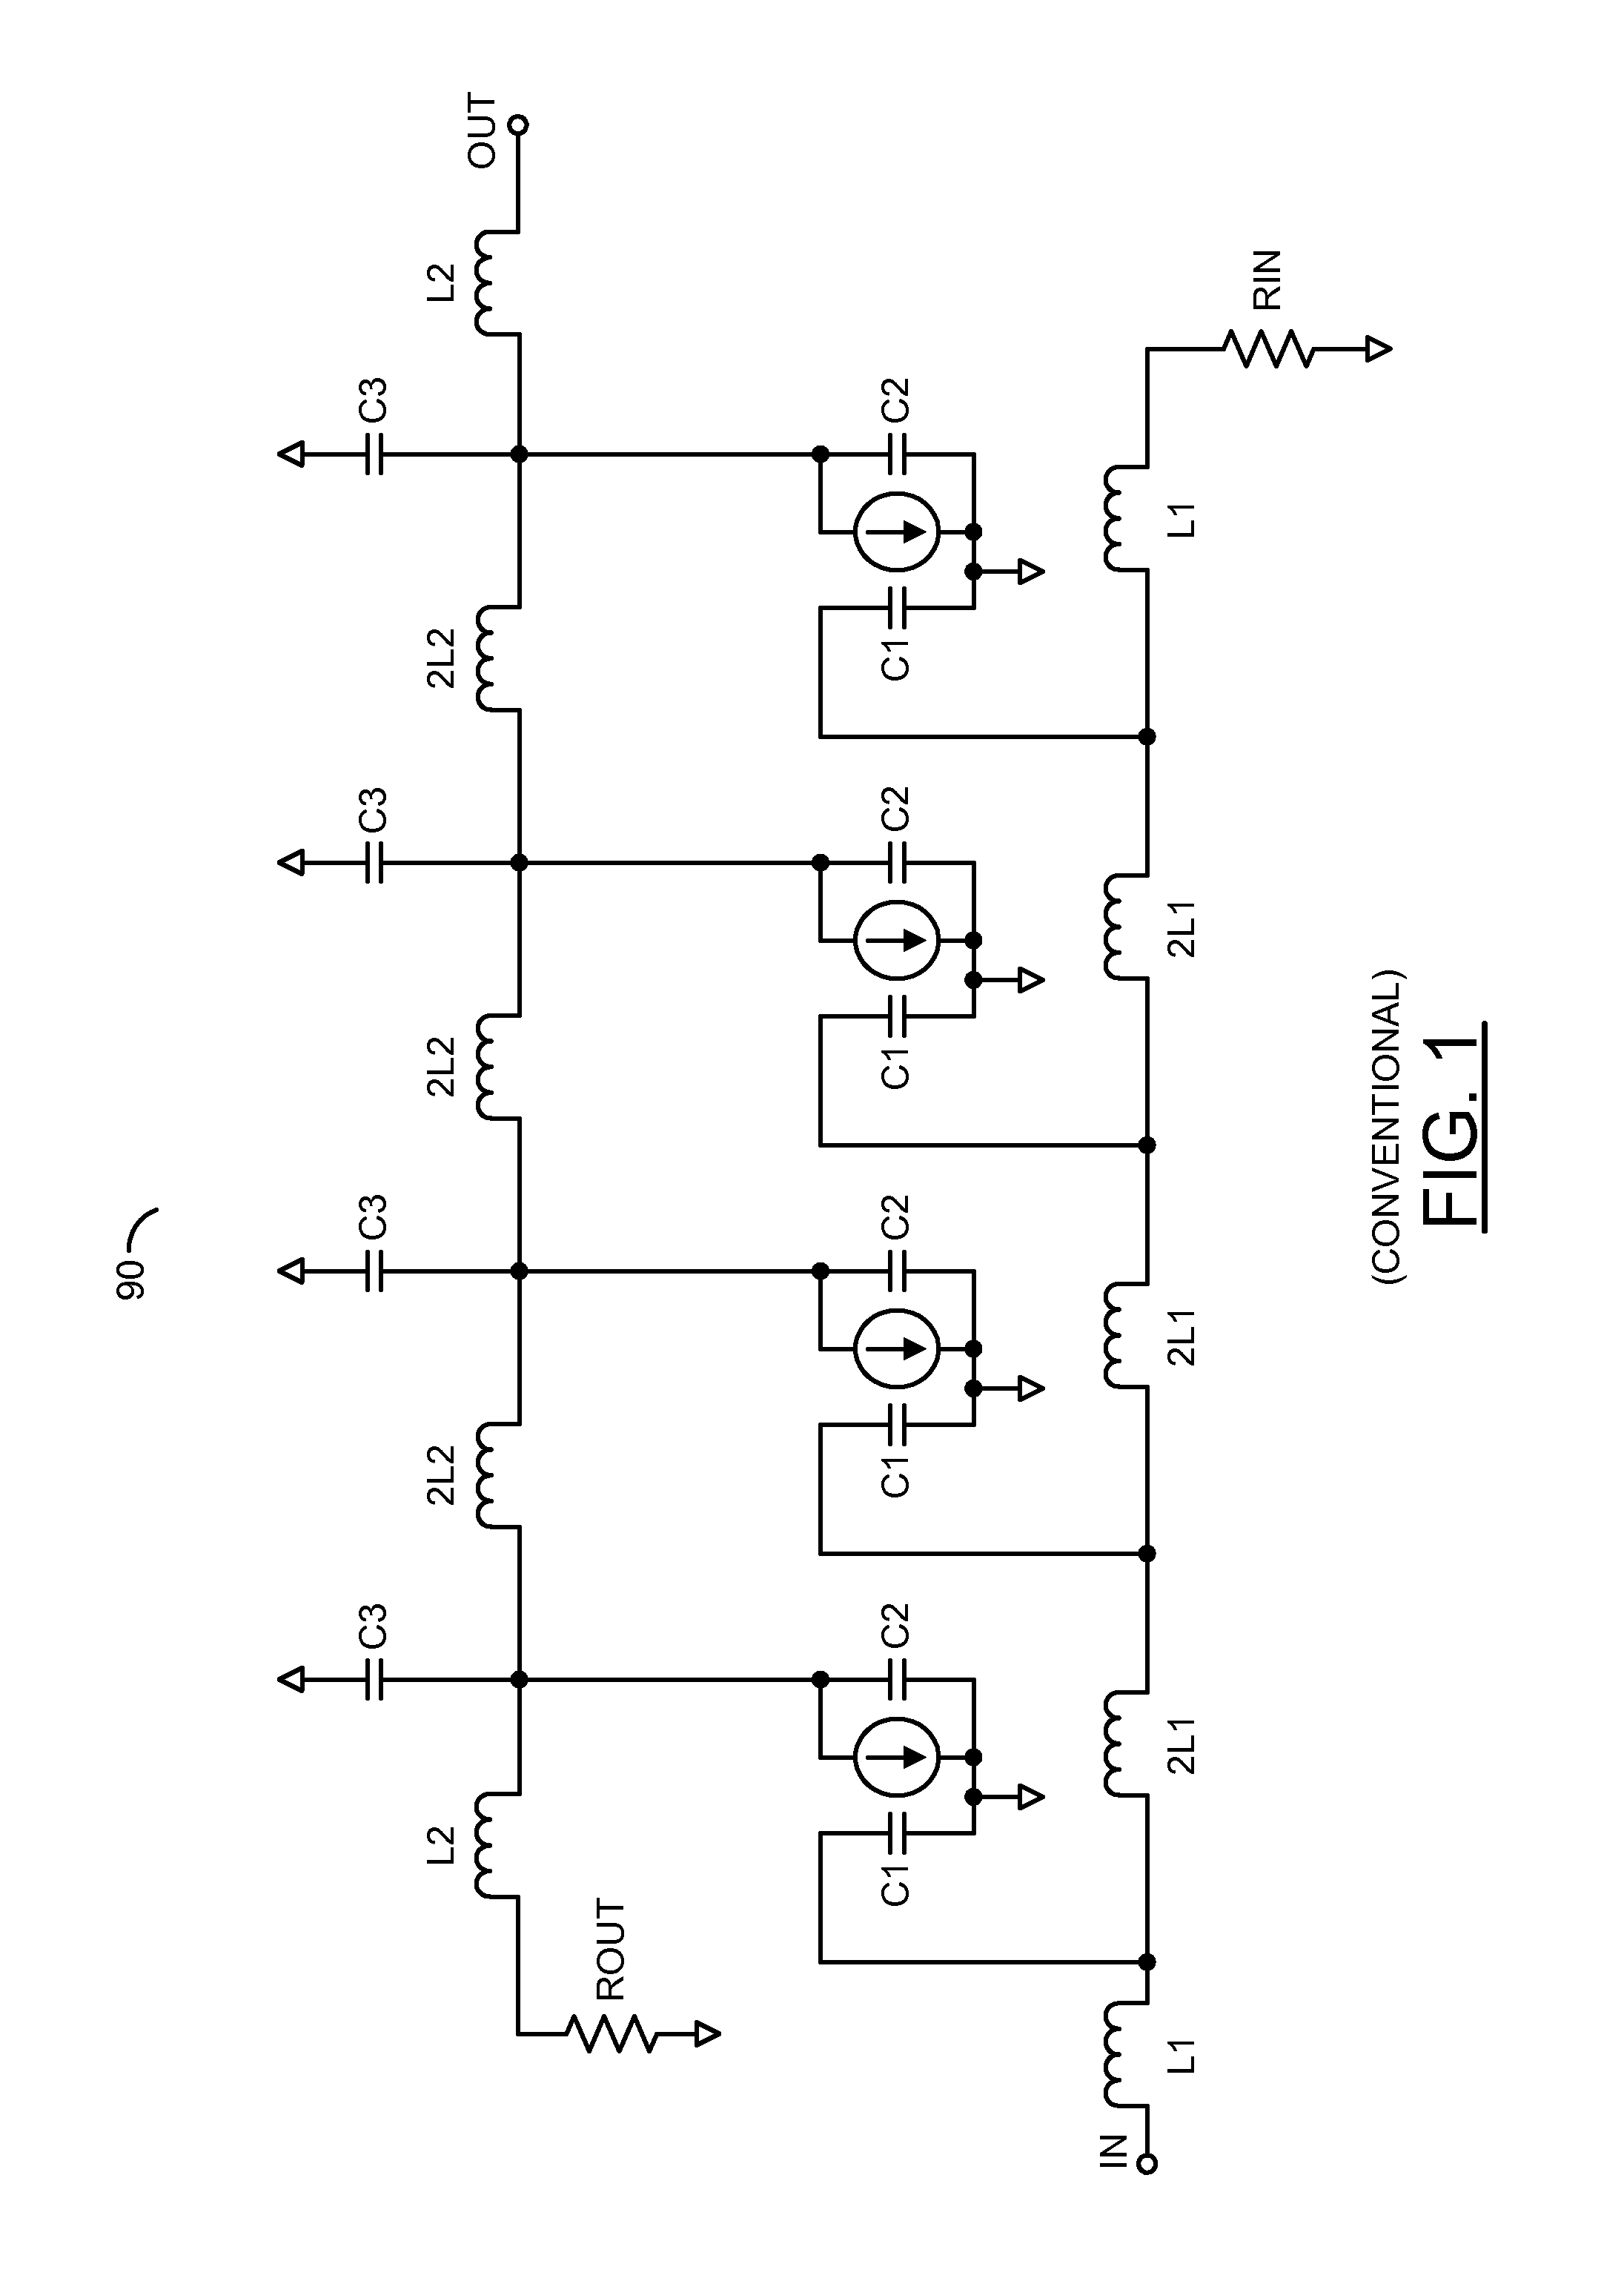 Distributed transconductance amplifier